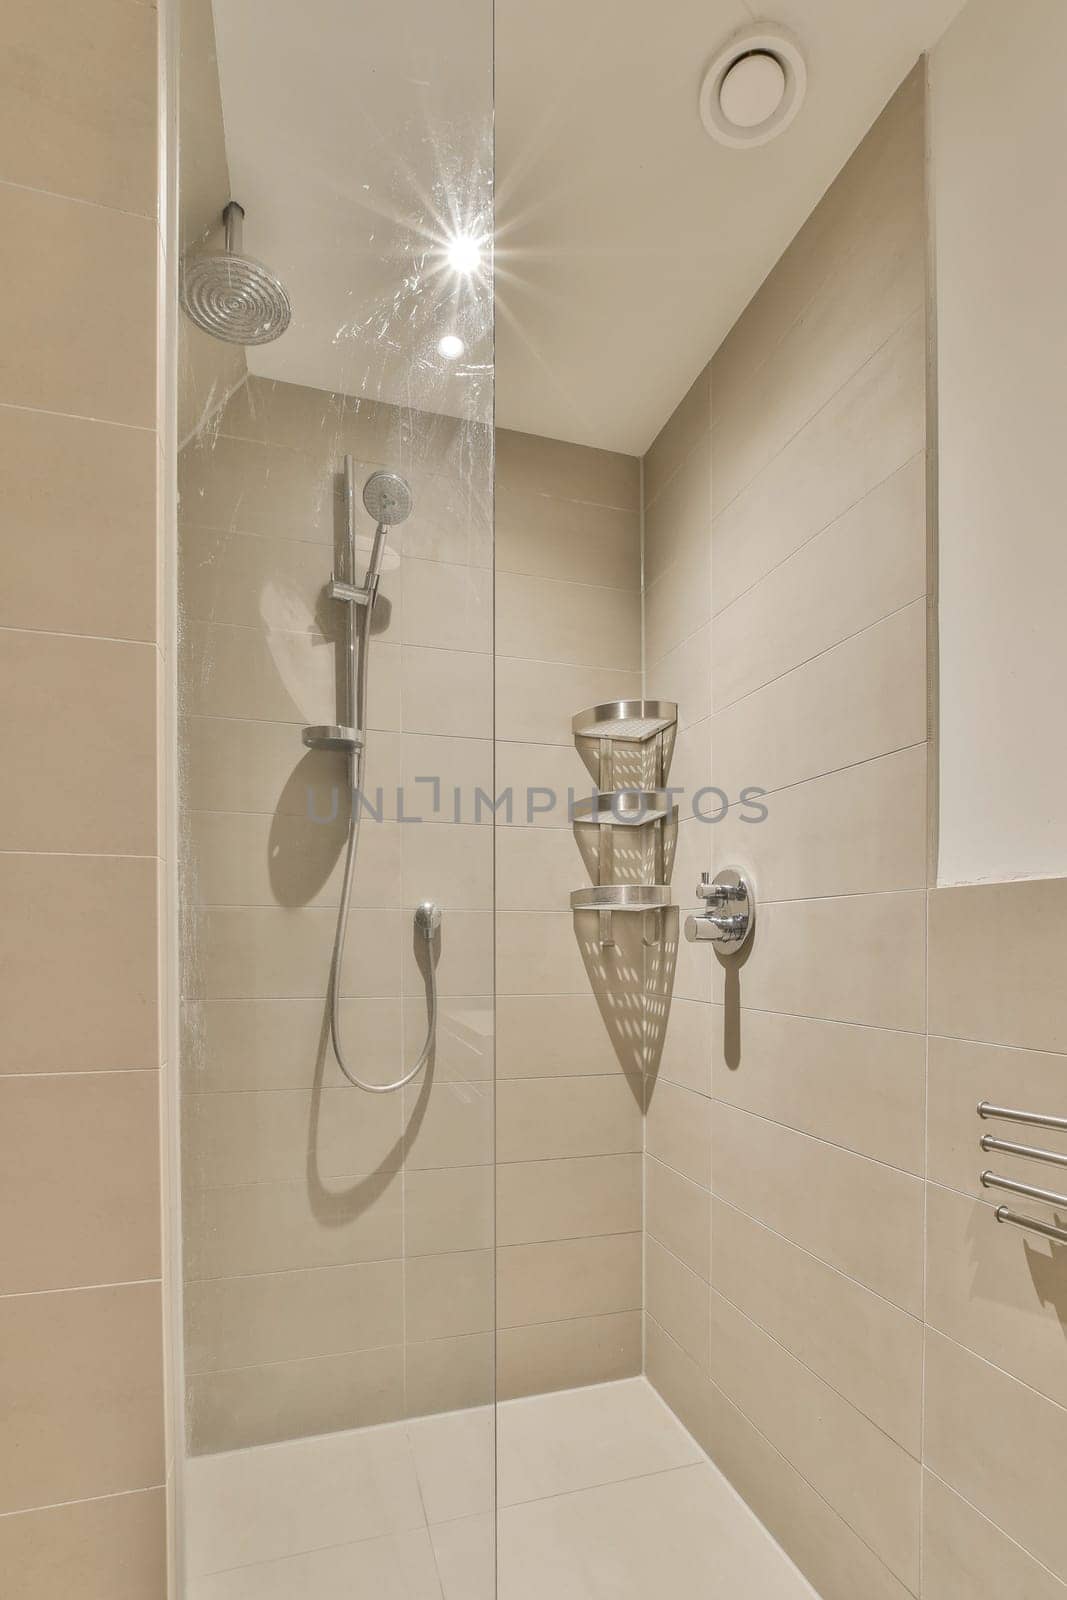 a bathroom with shower head and handrails on the wall, in front of glass doored shower stall